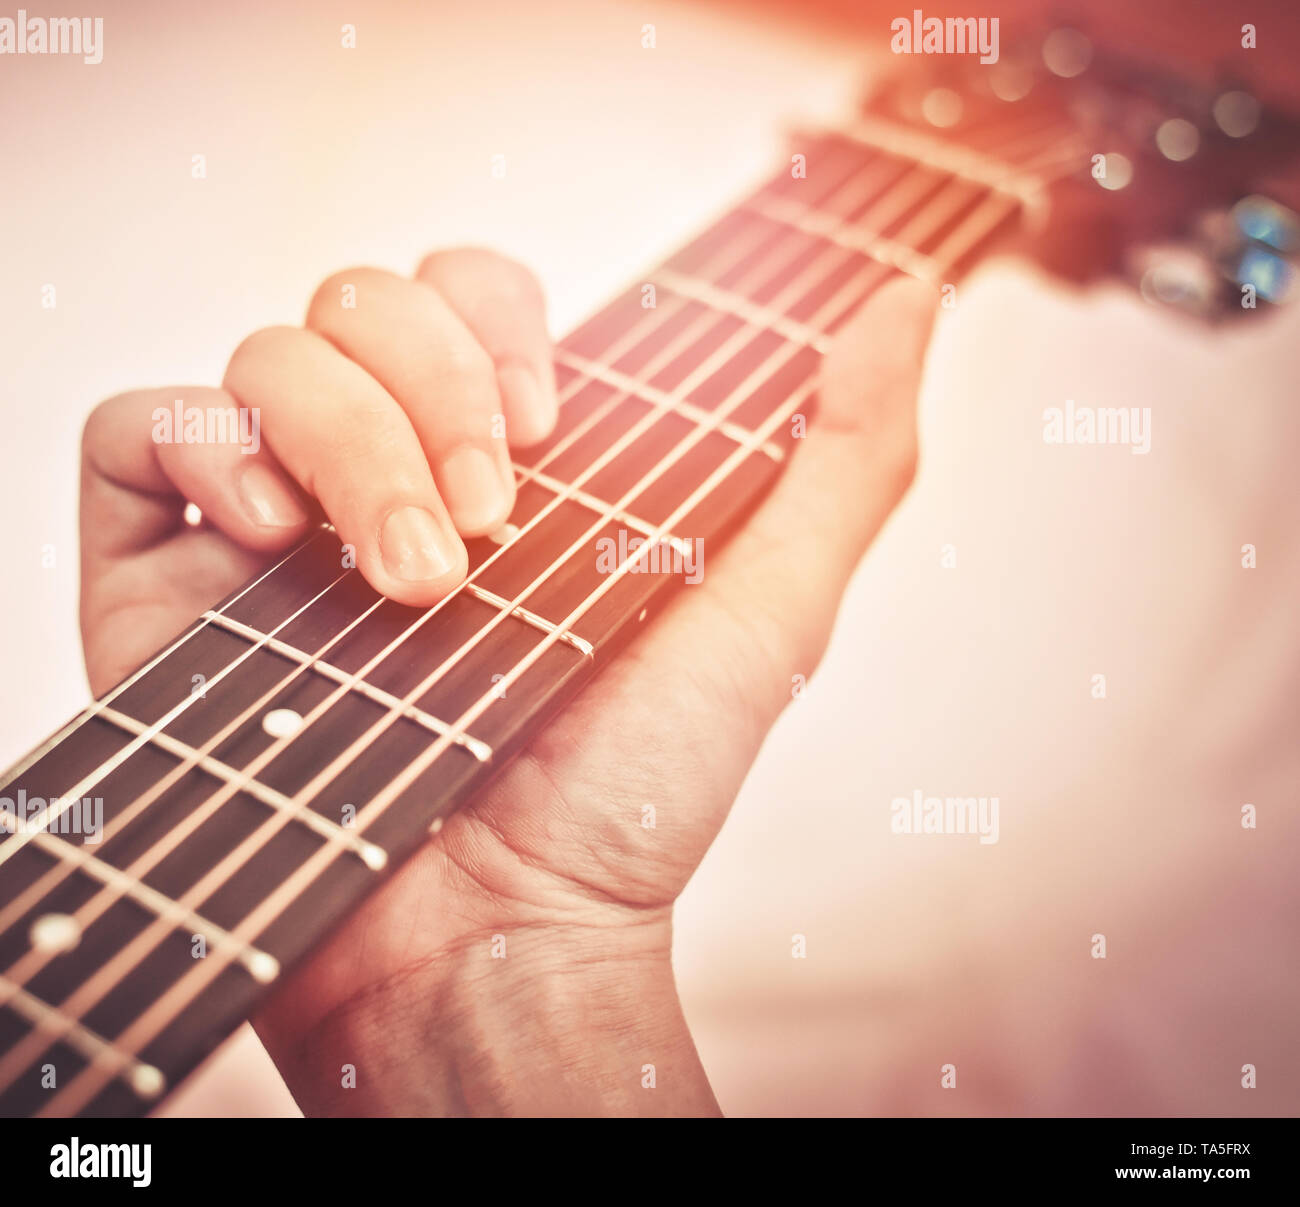 Guitar Player Hand Man Playing Acoustic Guitar In Chord Tab Guitar Fretboard Stock Photo Alamy